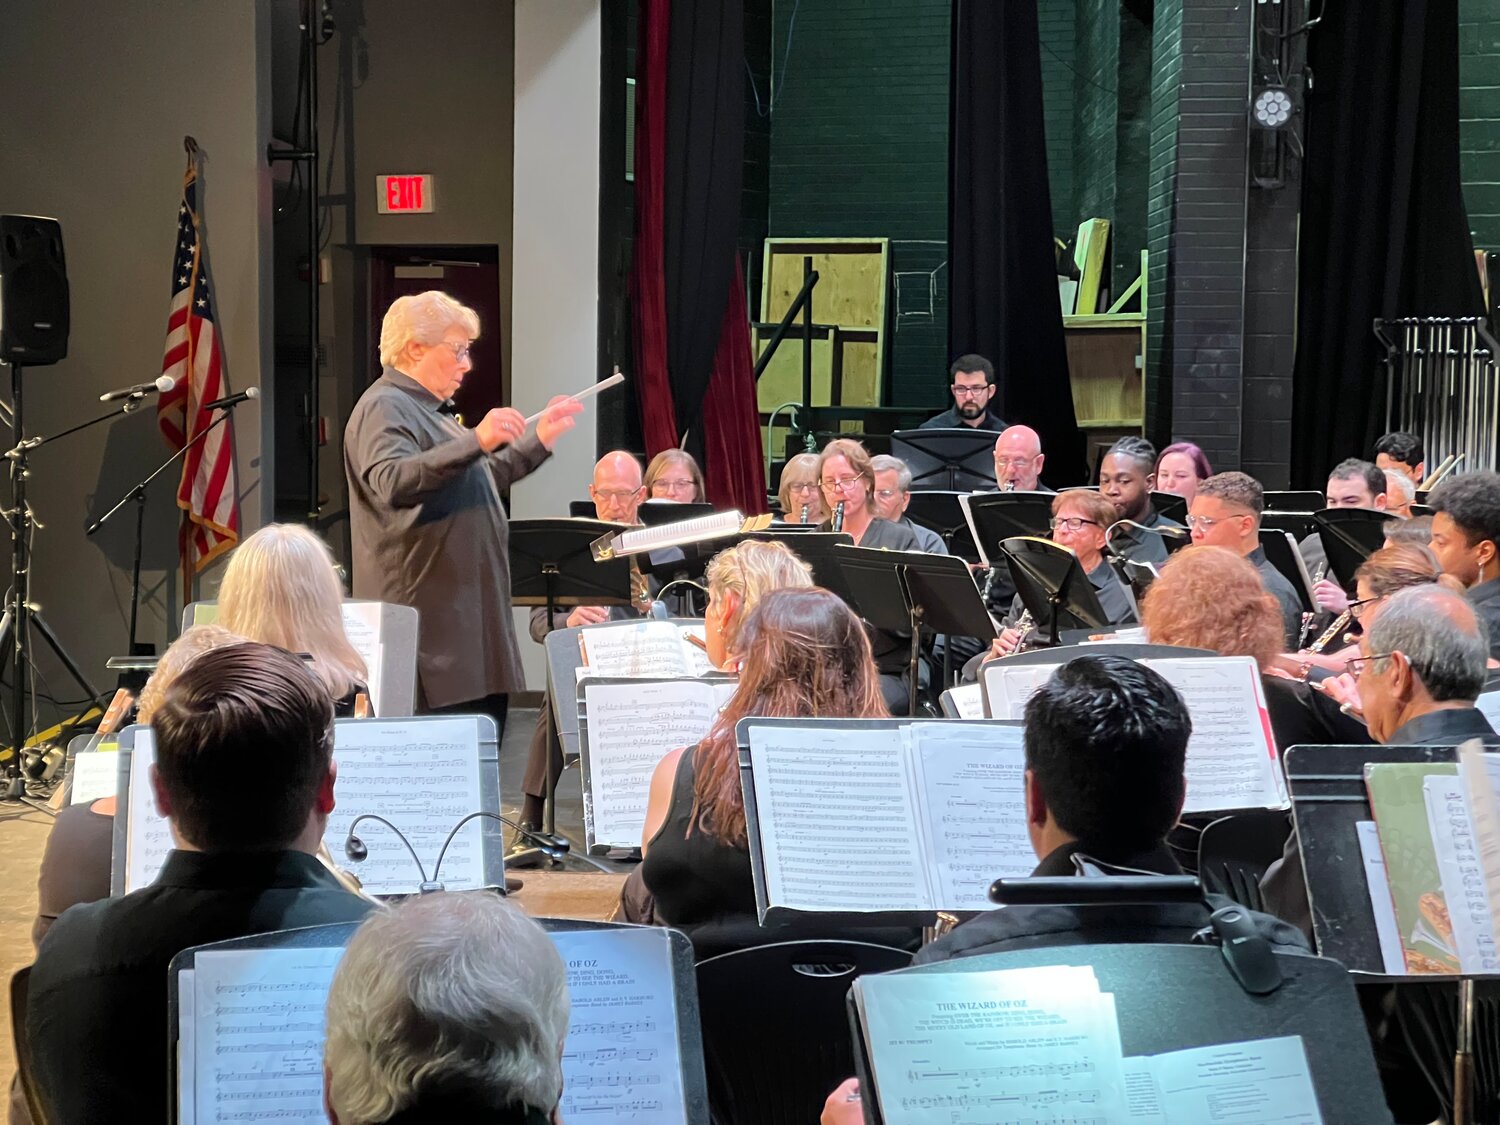 The Northwinds Symphonic Band has been practicing for months in anticipation of the Veterans Day concert.